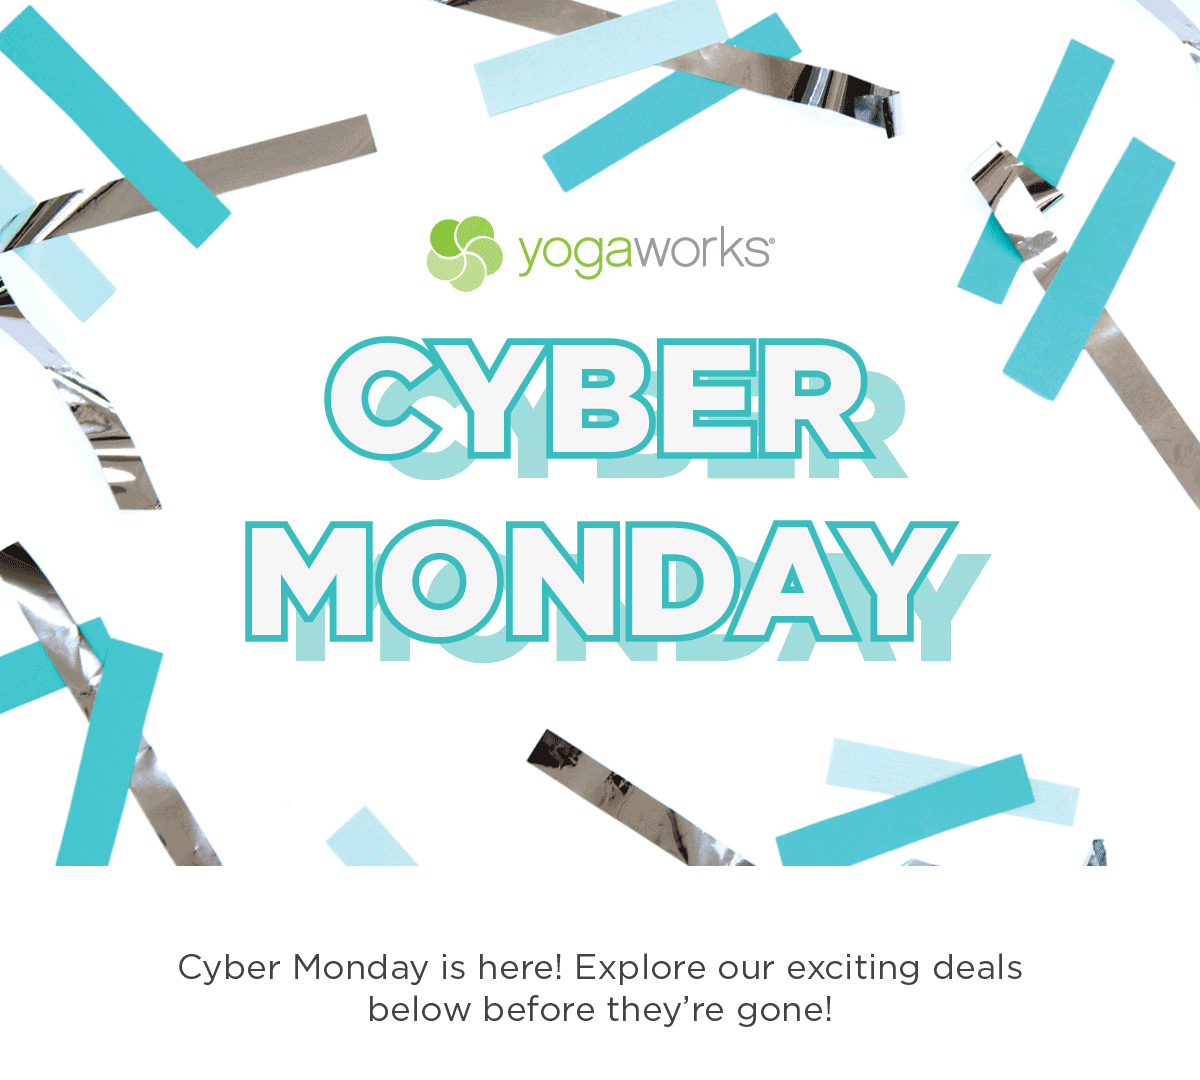 Cyber Monday is here - explore our exciting deals before they are gone!